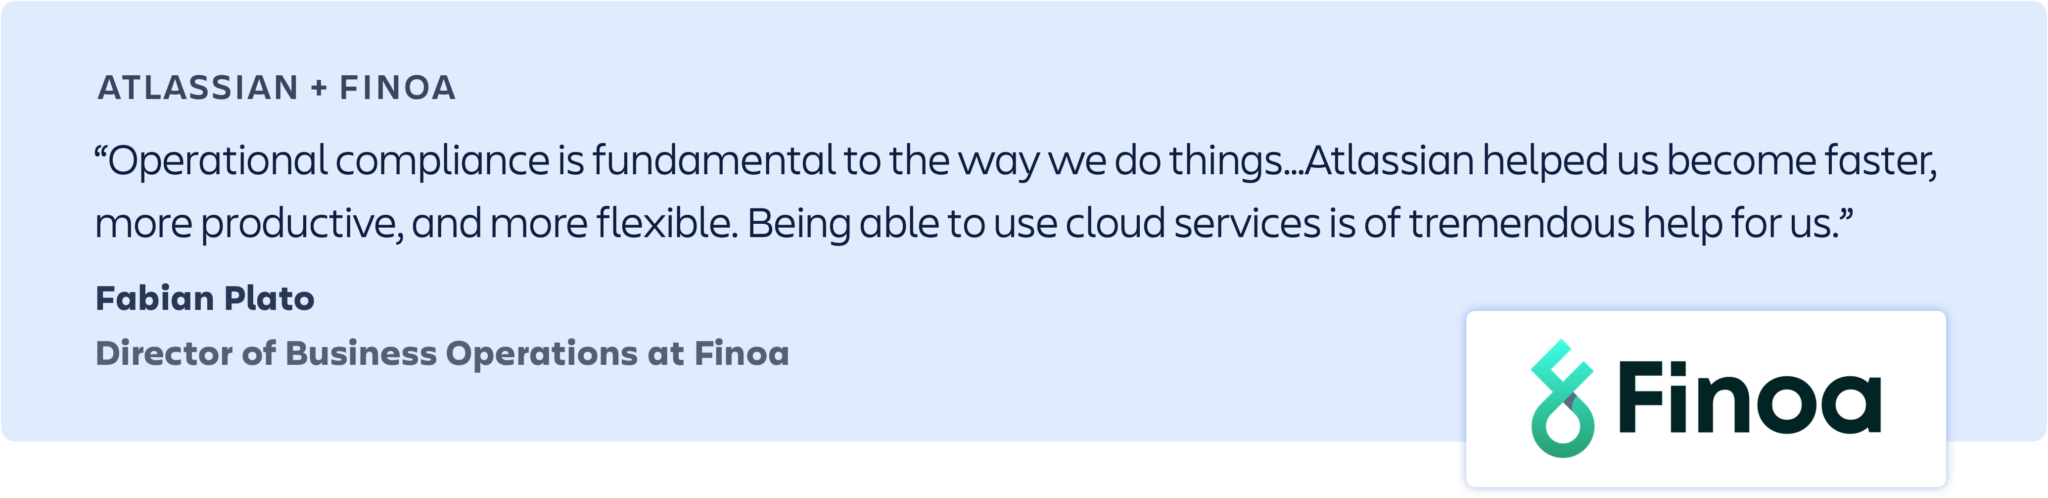 “Operational compliance is fundamental to the way we do things…Atlassian helped us become faster, more productive, and more flexible. Being able to use cloud services is of tremendous help for us.” – Fabian Plato, Director of Business Operations at Finoa